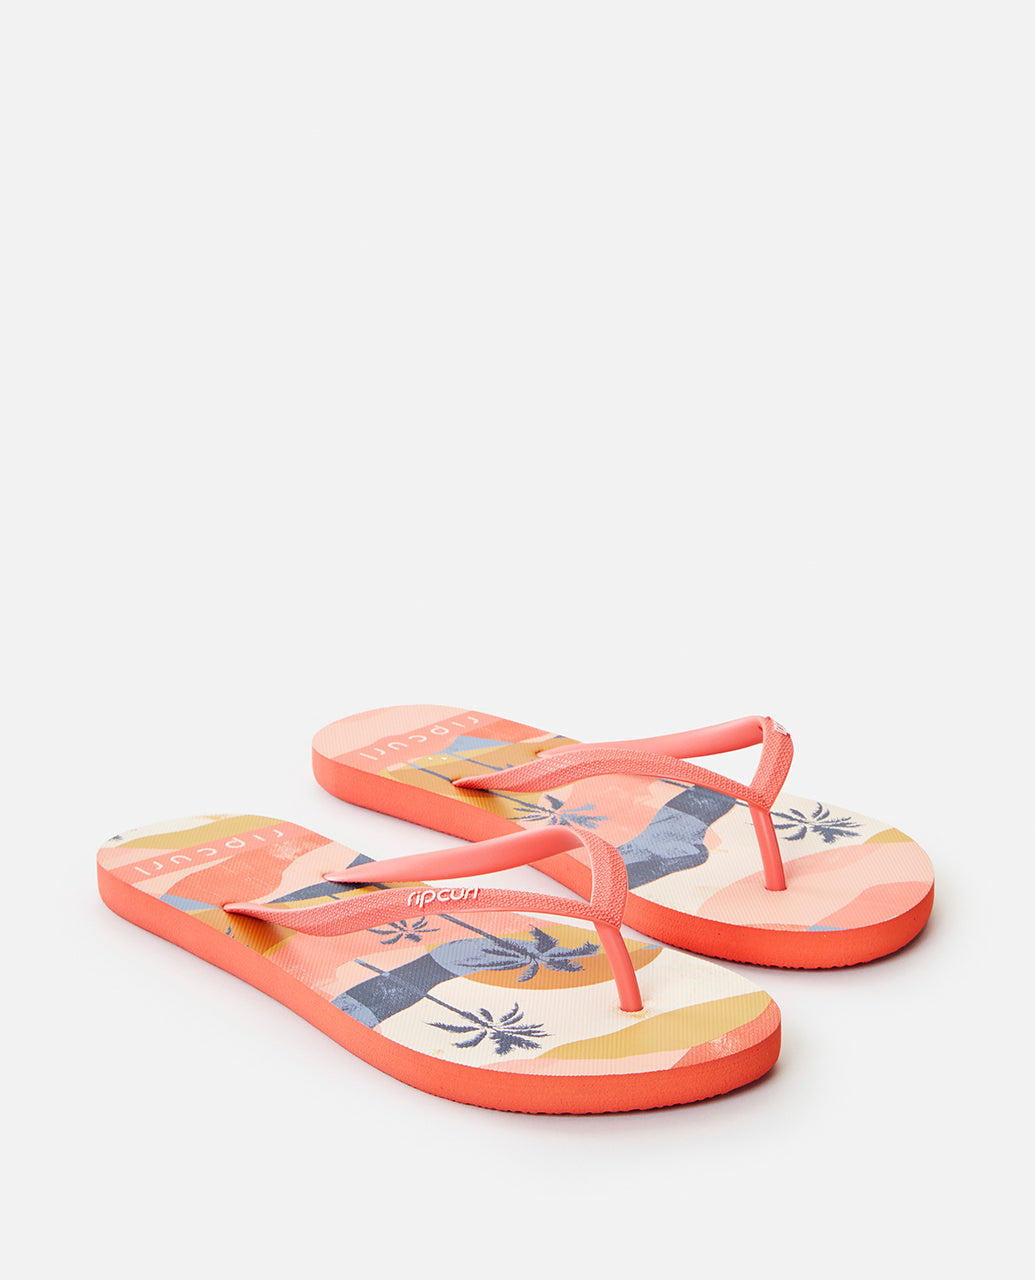 Melting Waves Thongs - Surf Footwear for womens – Rip Curl Indonesia